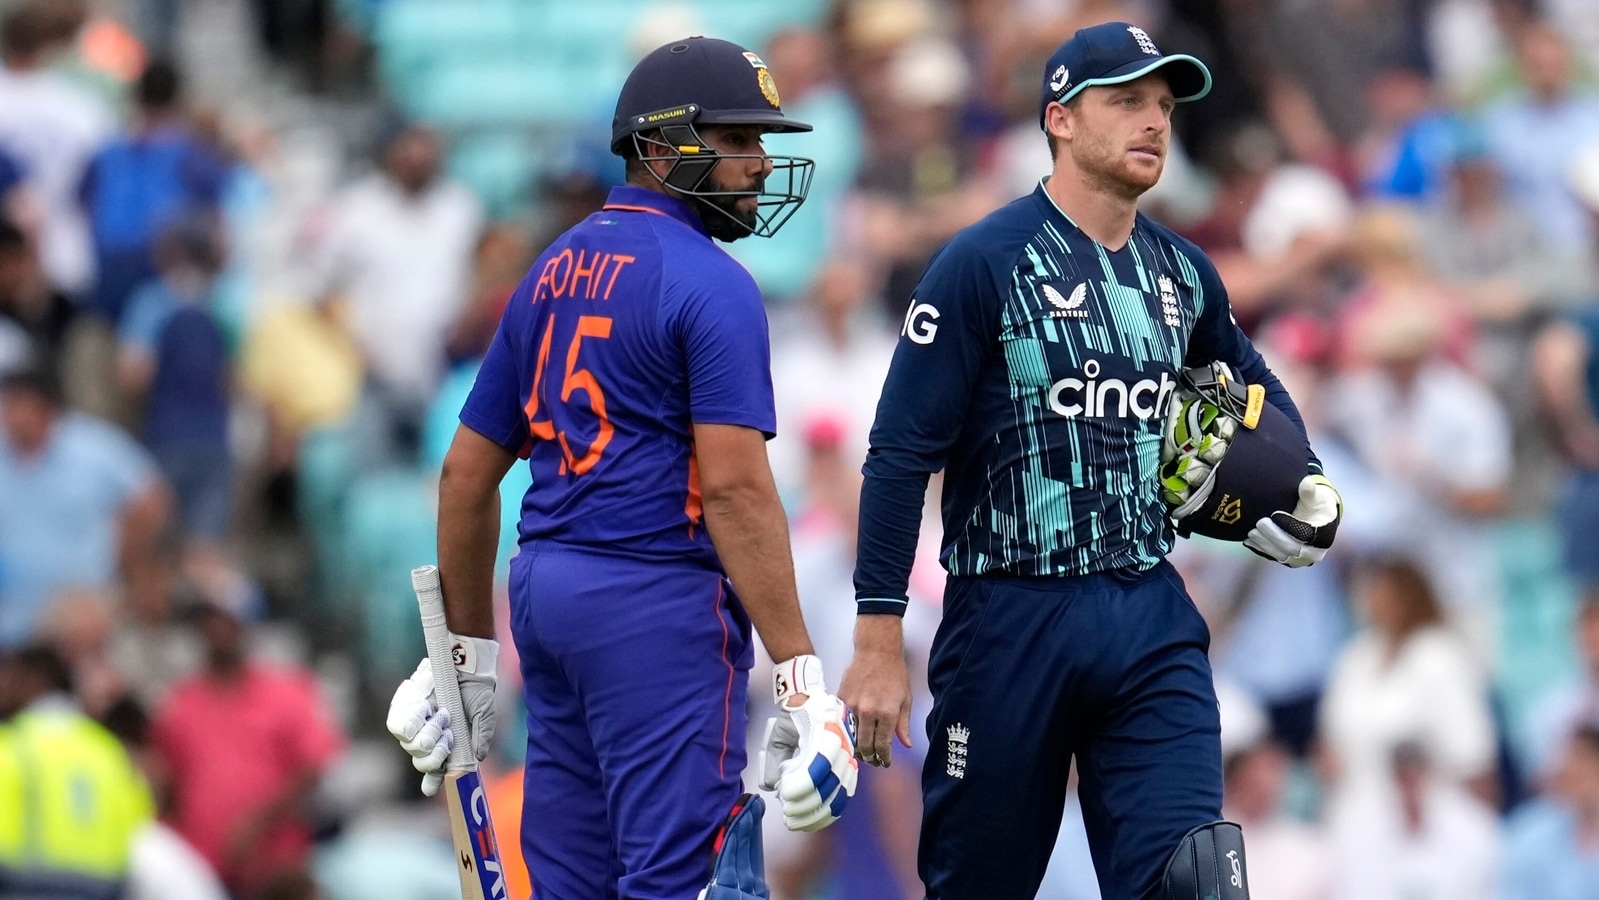 India vs England Live Streaming When and where to watch IND vs ENG 3rd ODI Cricket